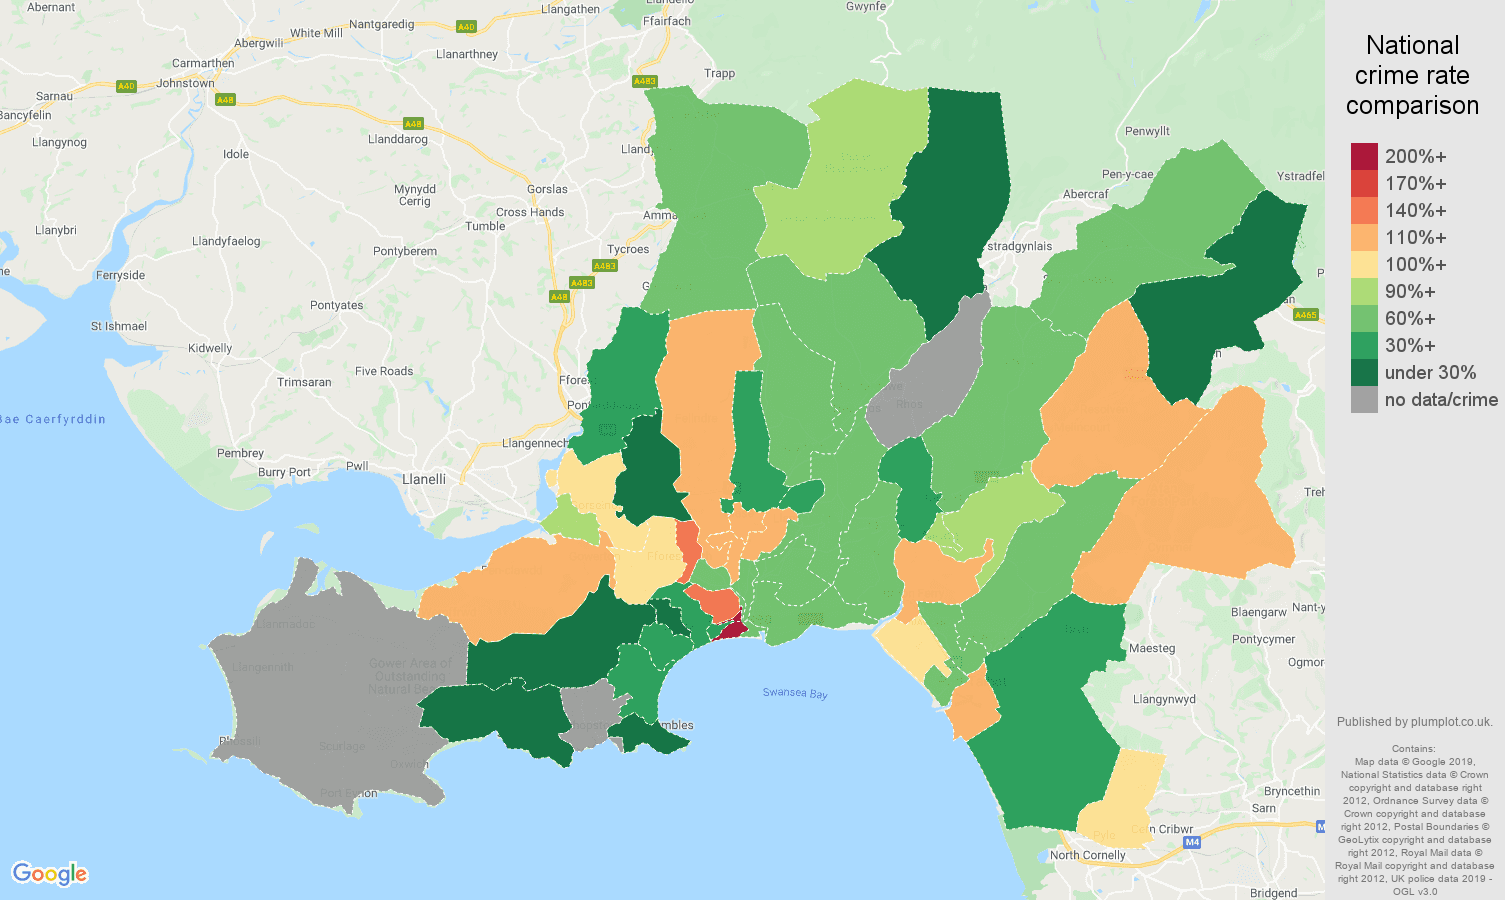 West Glamorgan other crime rate comparison map